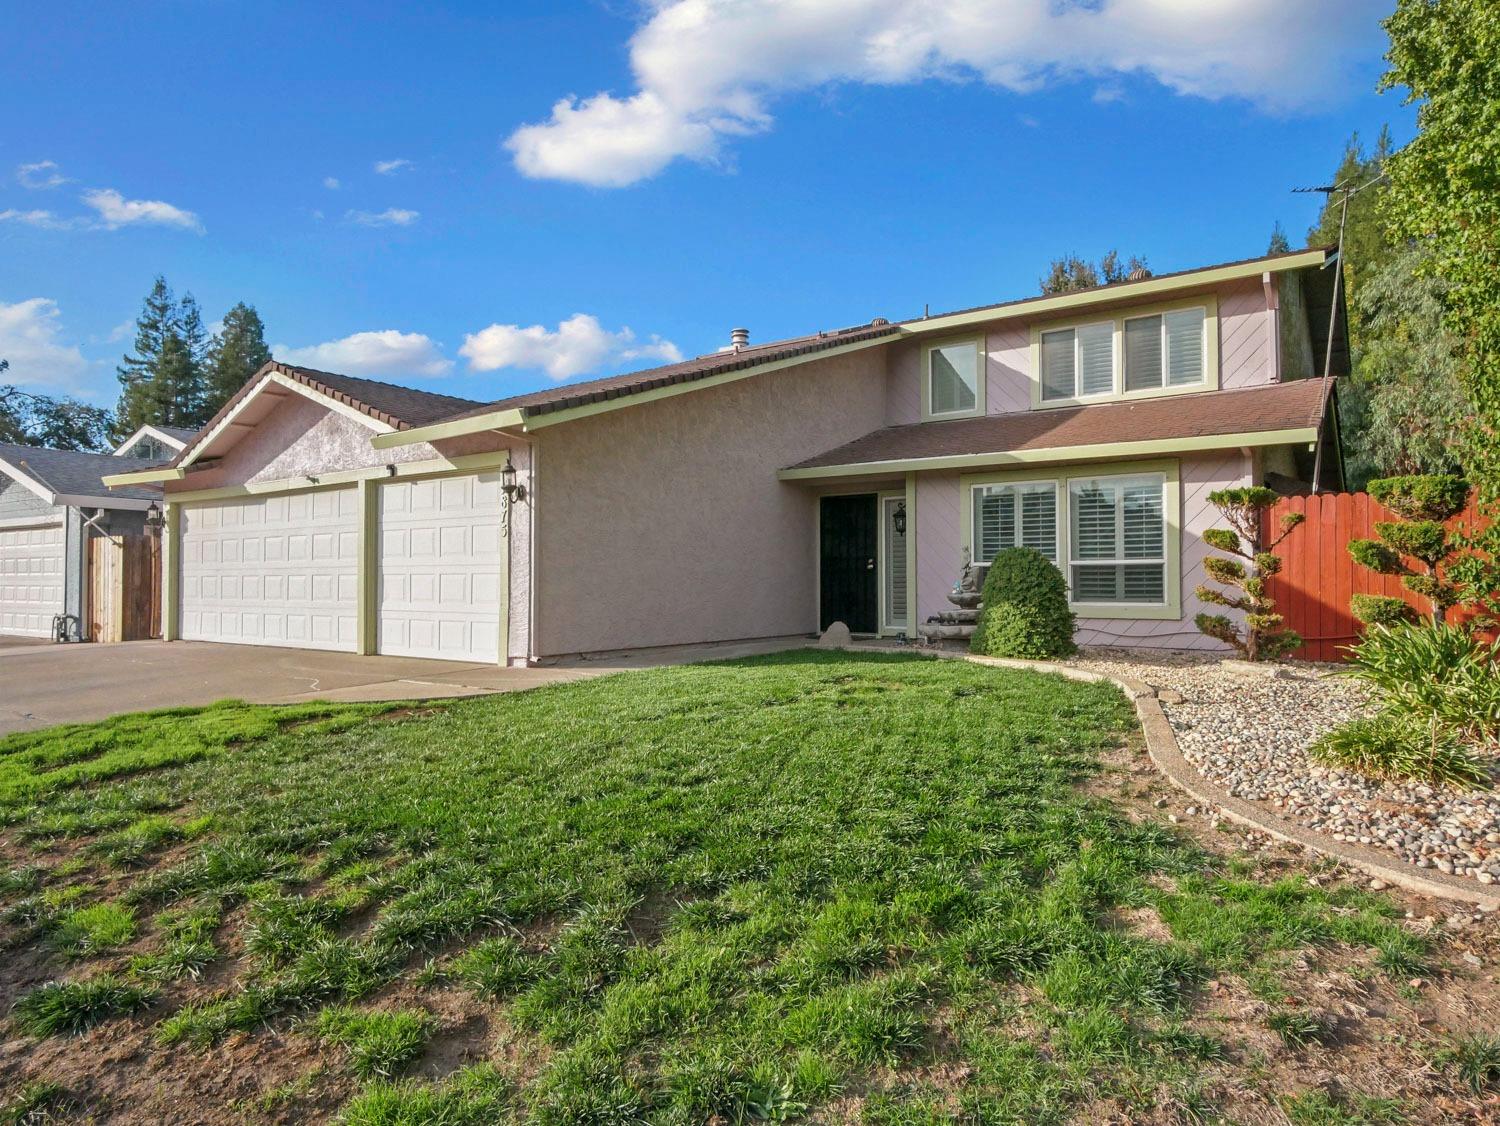 Location, Location, Location!! Welcome to 7875 Pilkerton Ct located in the heart of Citrus Heights, 